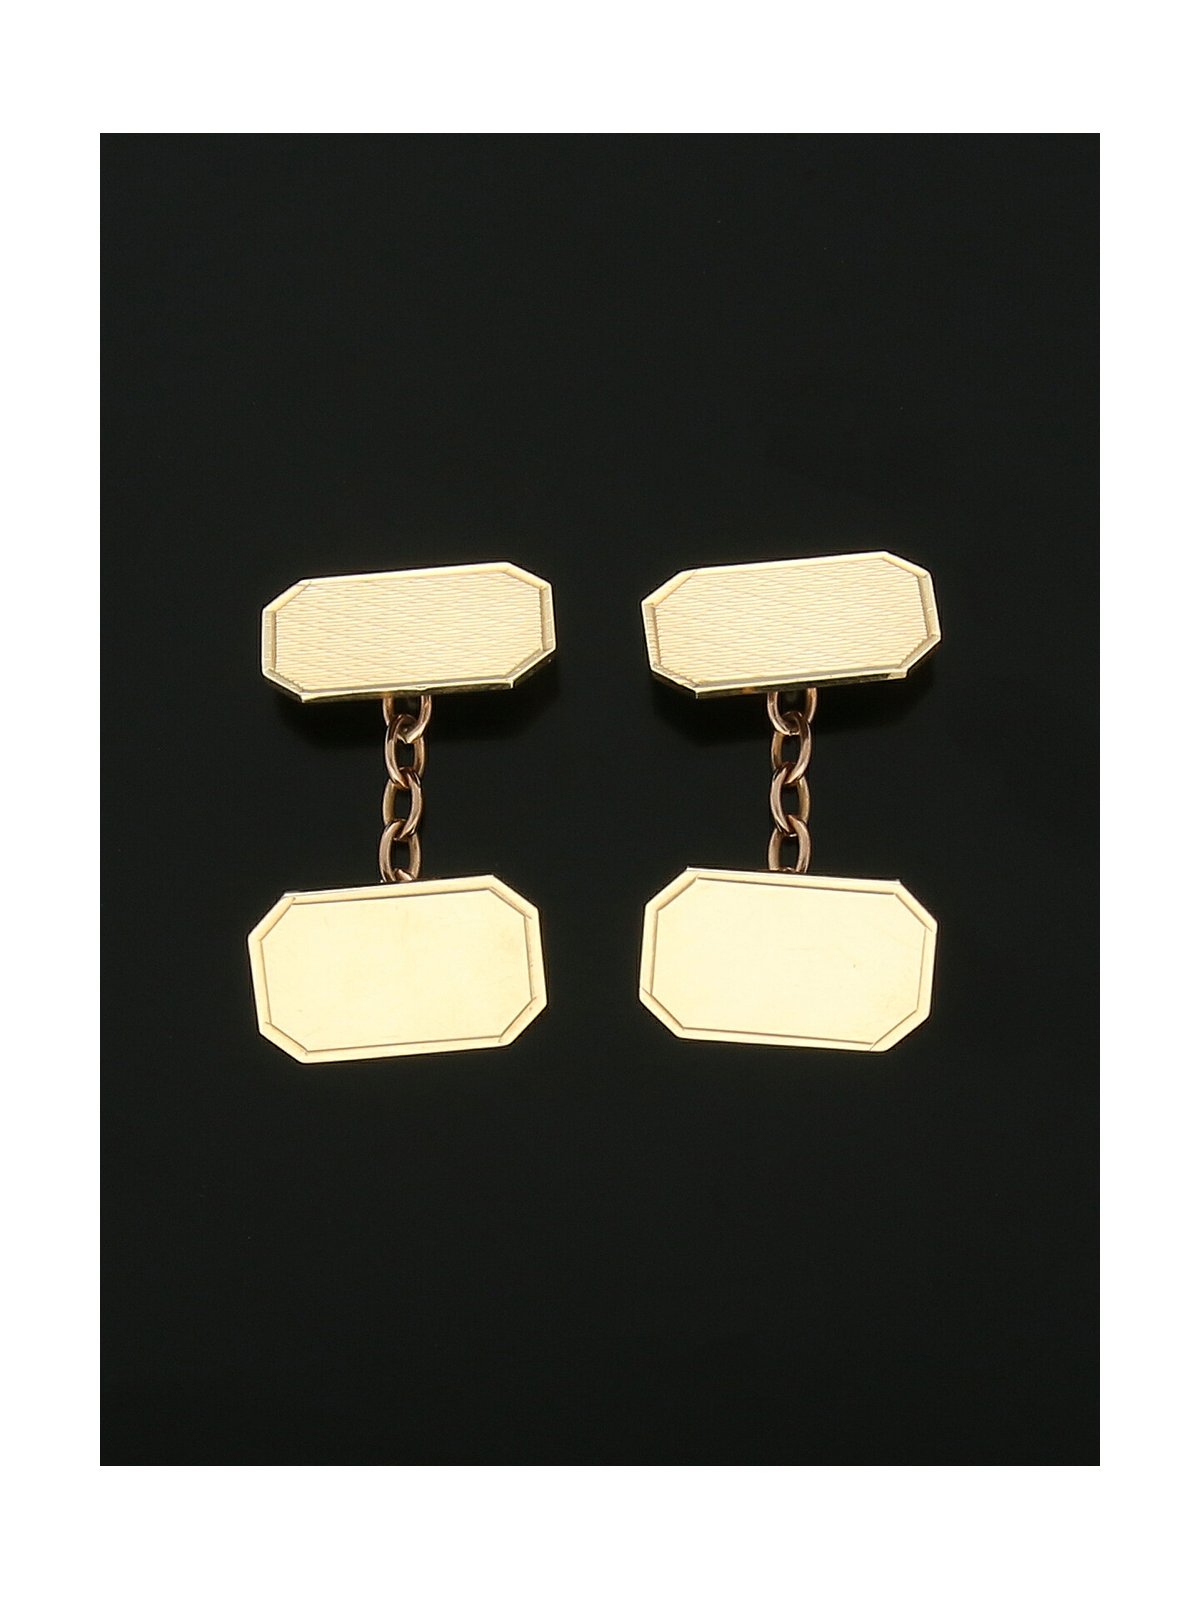 Pre Owned Oblong Patterned Cufflinks in 9ct Yellow Gold